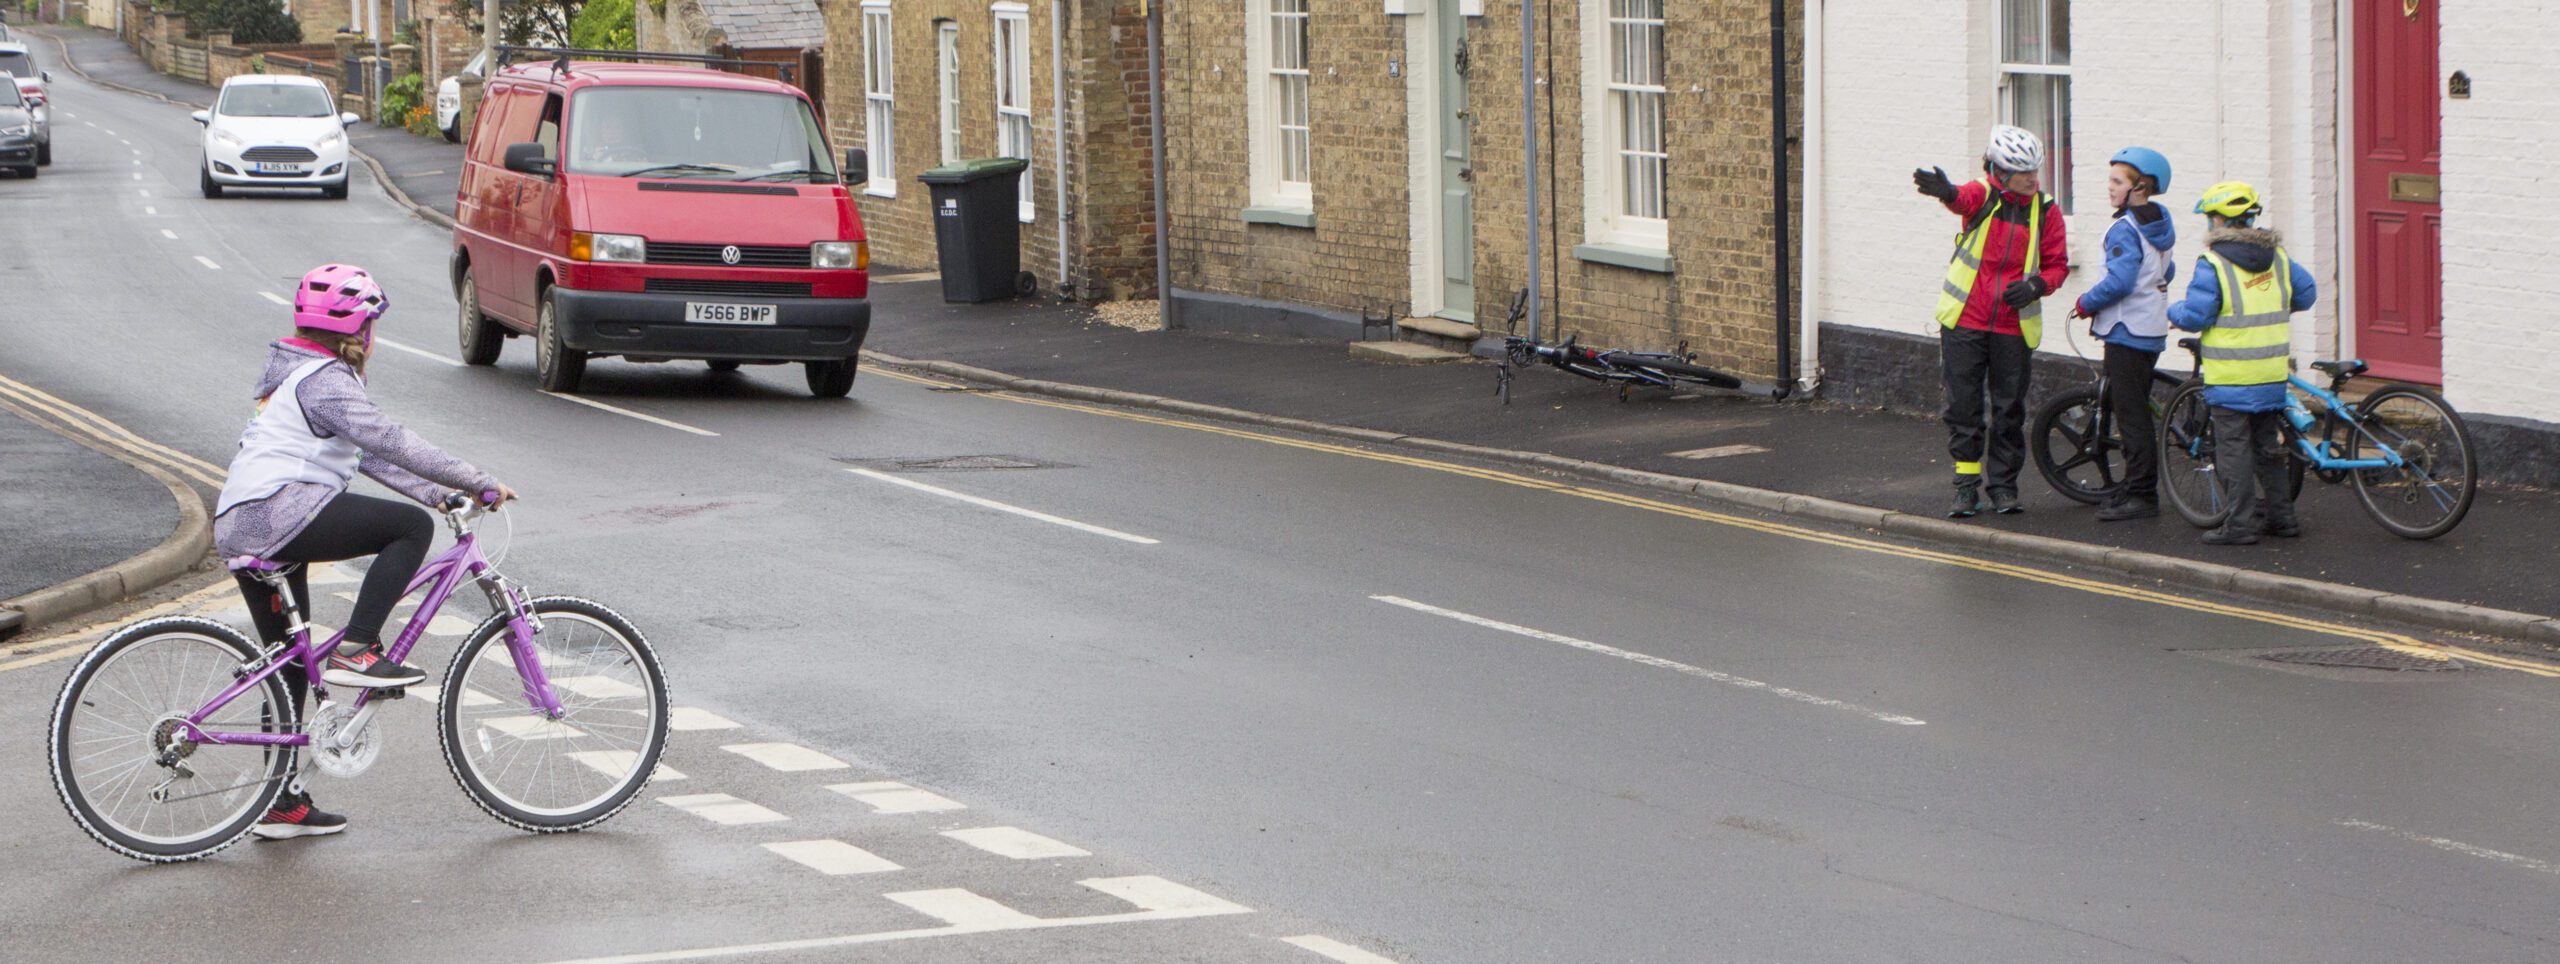 A girl on a pink cycle waits at a t junction, she is wearing a pink helmet. There is a van approaching on the road, driving towards the camera. On the pavement an instructor points out the road layout to two children stood on the pavement.